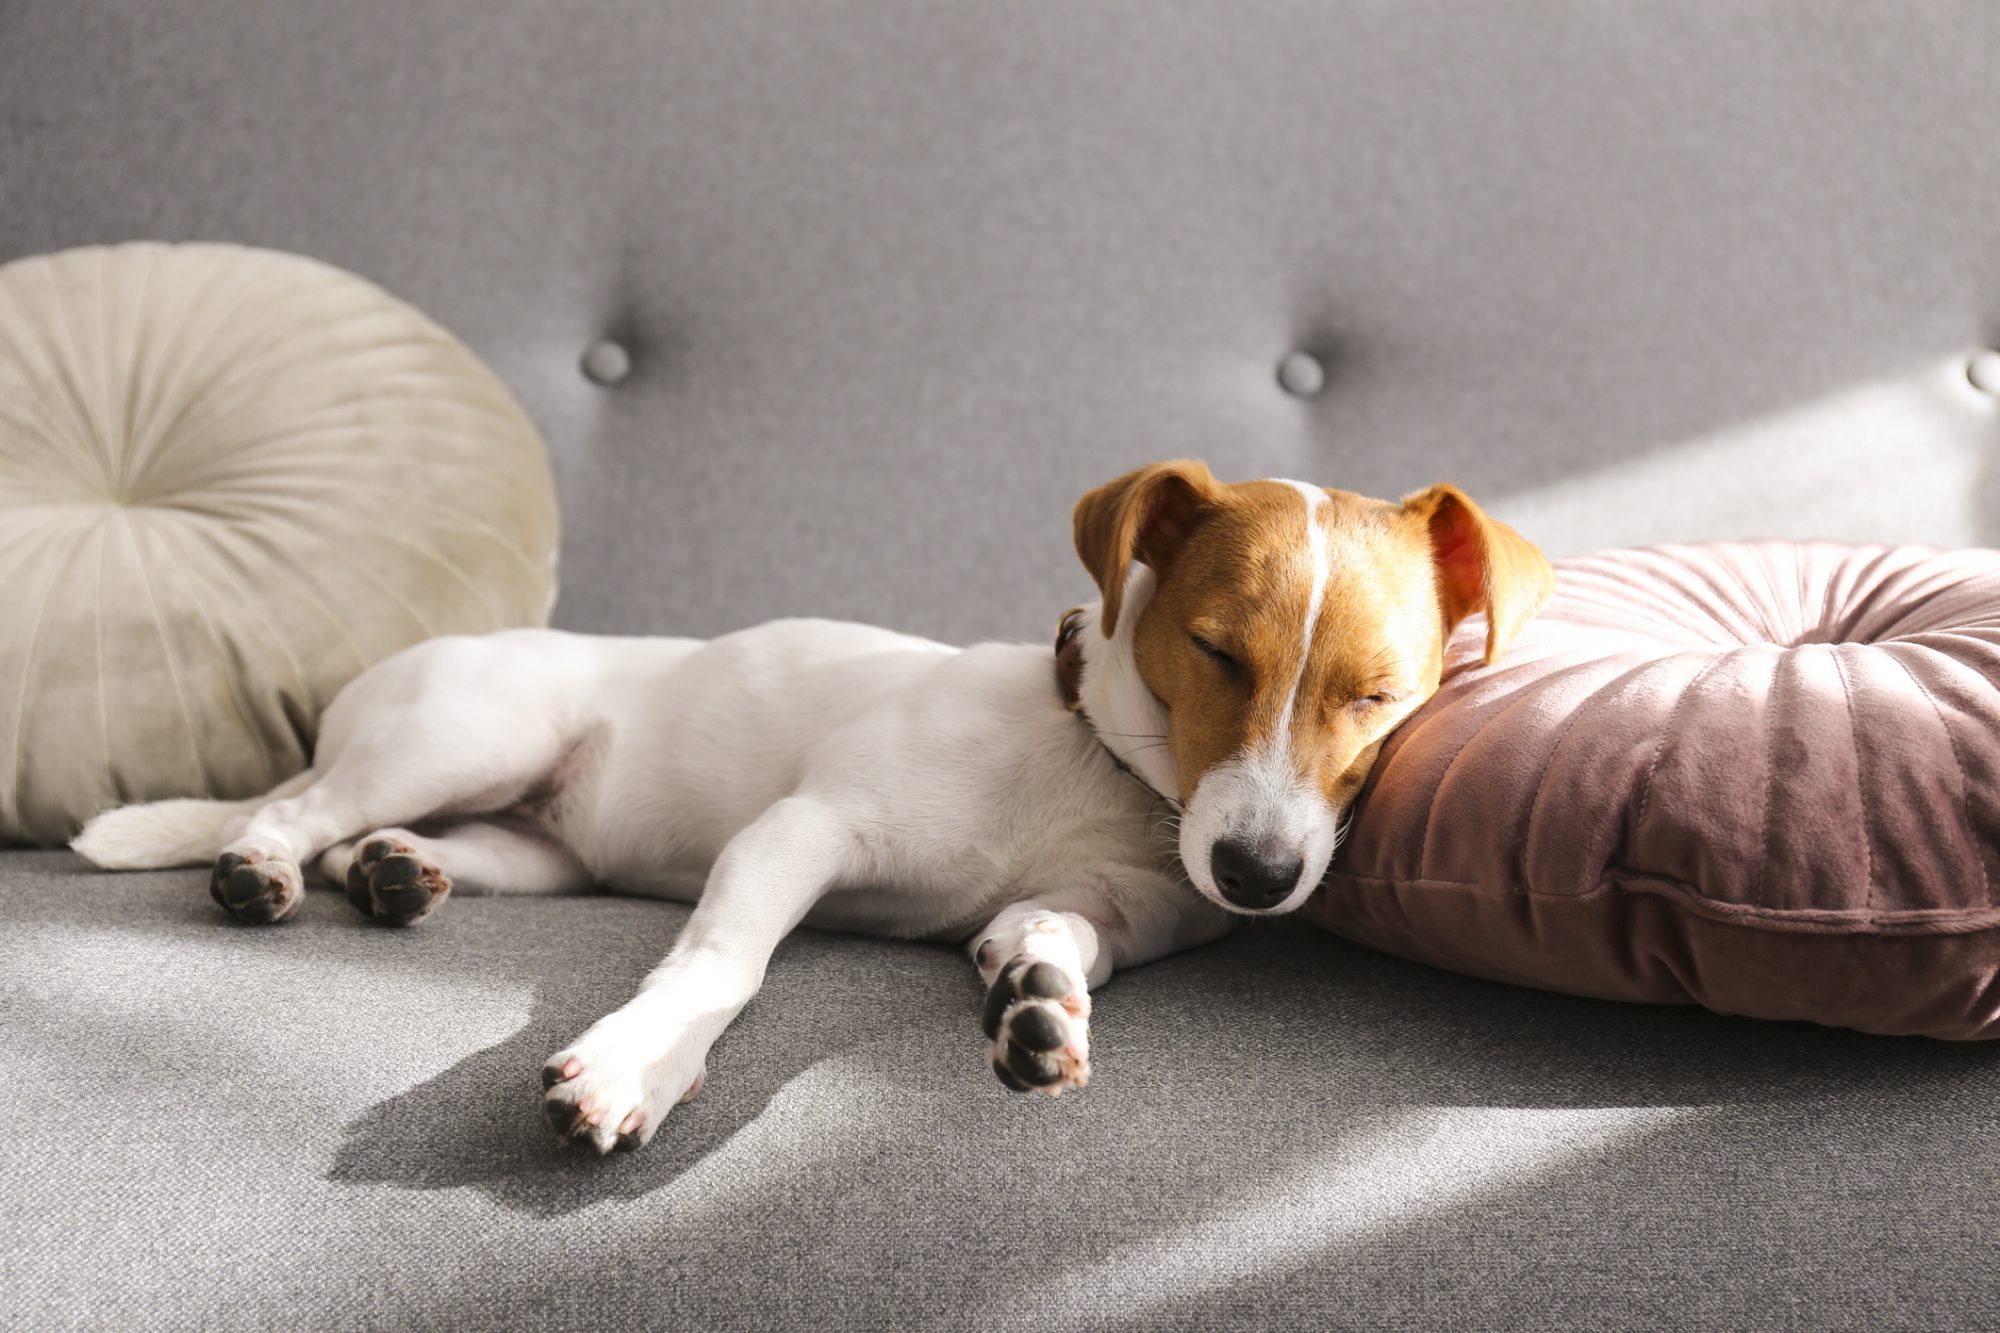 Puppy asleep on couch next to circular cushions in apartment home